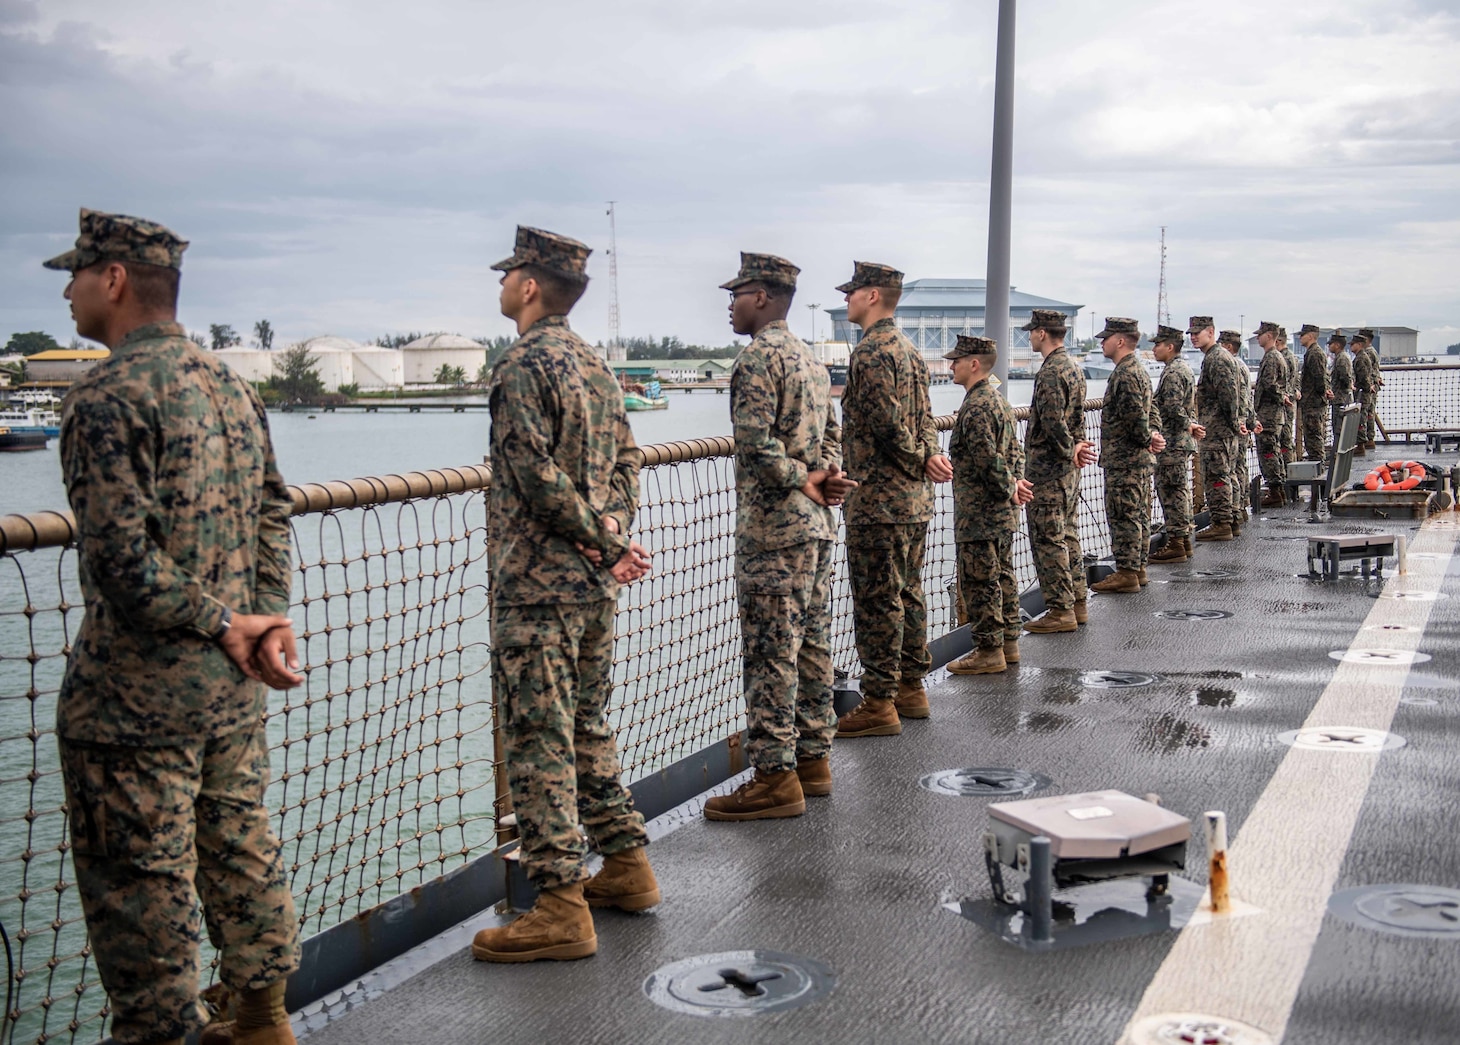 MAURA, Brunei (Oct. 10, 2019) Marines, assigned to the 11th Marine Expeditionary Unit (MEU), man the rails of the amphibious dock landing ship USS Harpers Ferry (LSD 49) as the ship arrives in Maura, Brunei, for Cooperation Afloat Readiness and Training (CARAT) Brunei. Harpers Ferry and elements of the 11th MEU are ashore in Brunei to perform day and night training in an urban environment and to enhance interoperability and partnership between the U.S. and Brunei during CARAT Brunei 2019.